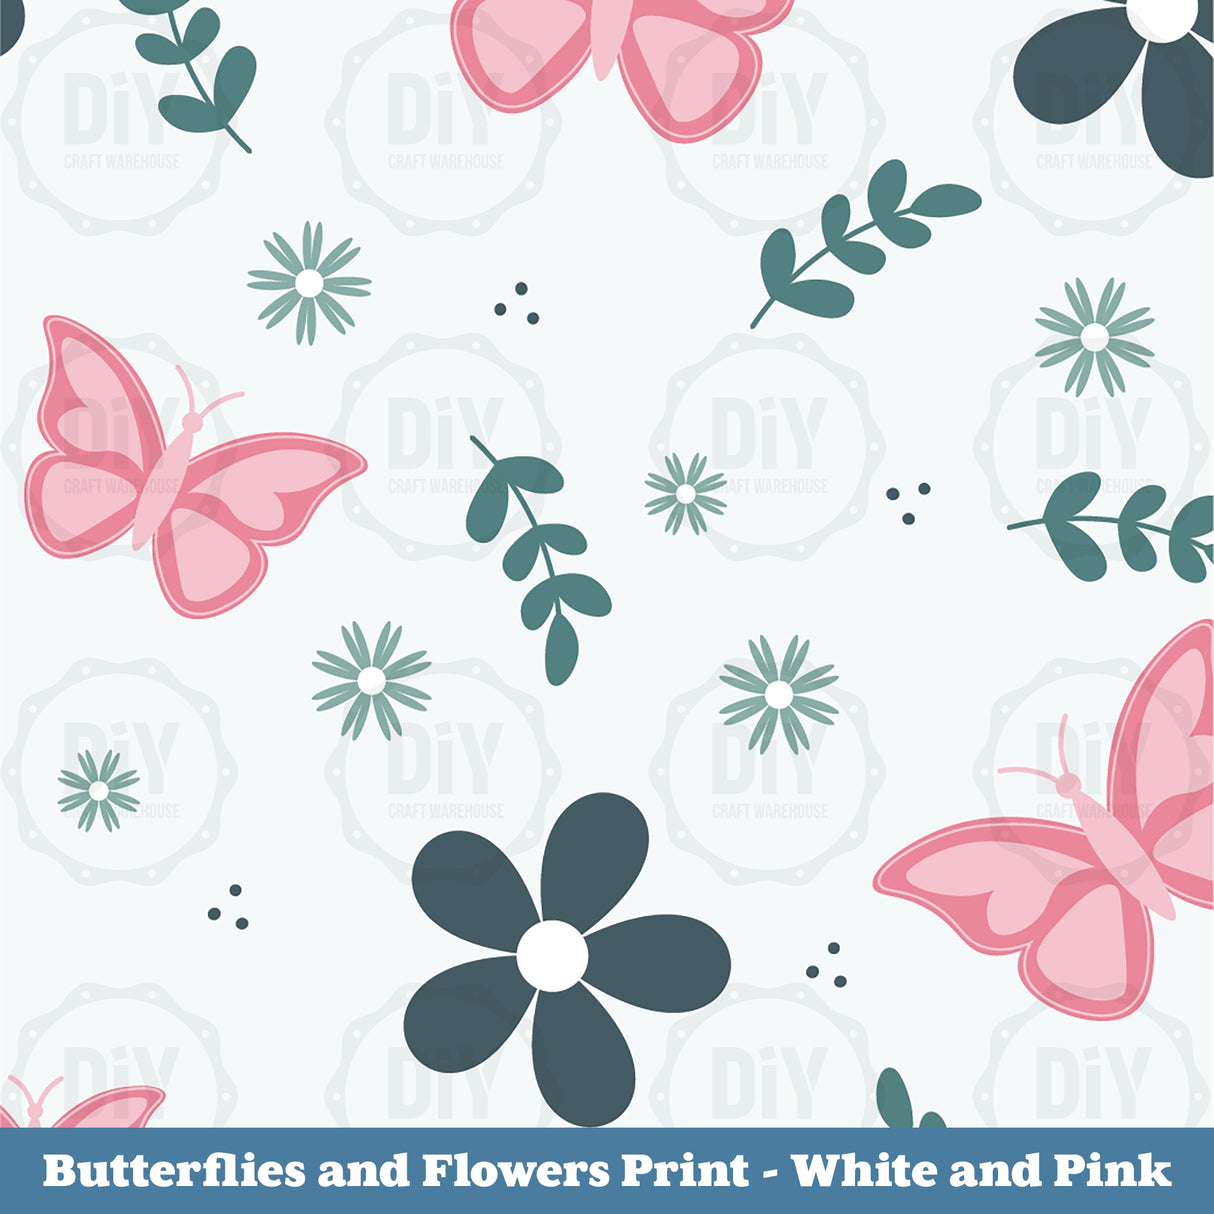 Butterflies and Flowers Sublimation Transfer - White & Pink